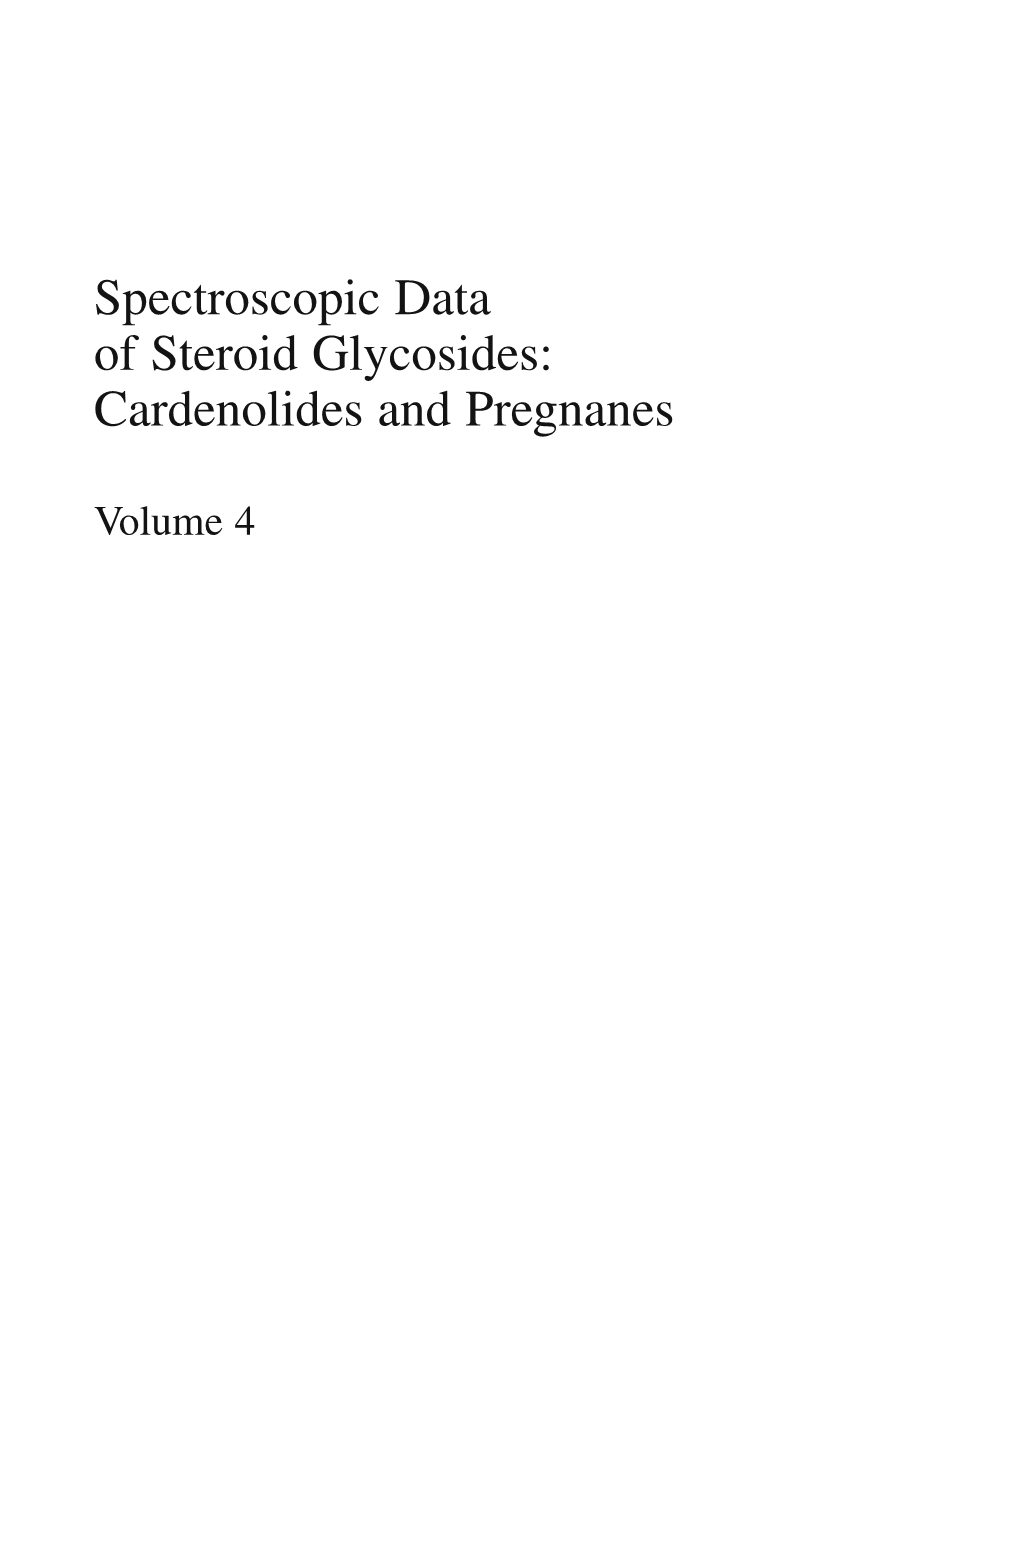 Spectroscopic Data of Steroid Glycosides: Cardenolides and Pregnanes